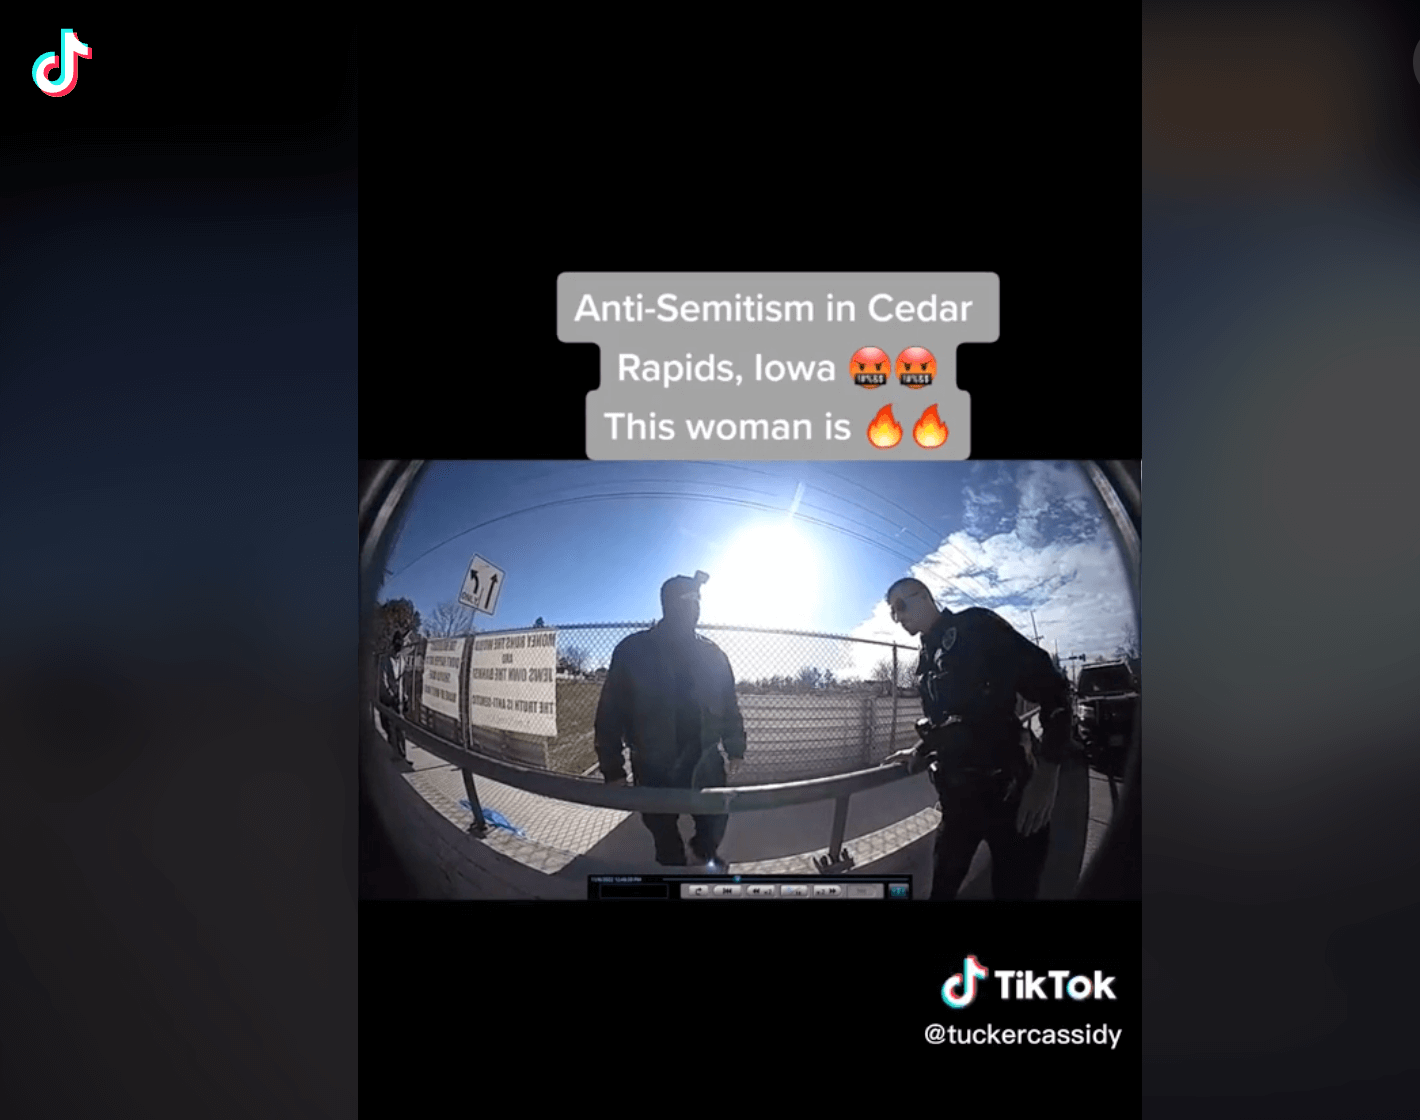 Police body camera footage of an incident involving men standing near antisemitic signs and a woman demanding they be taken down has gone viral on TikTok. 